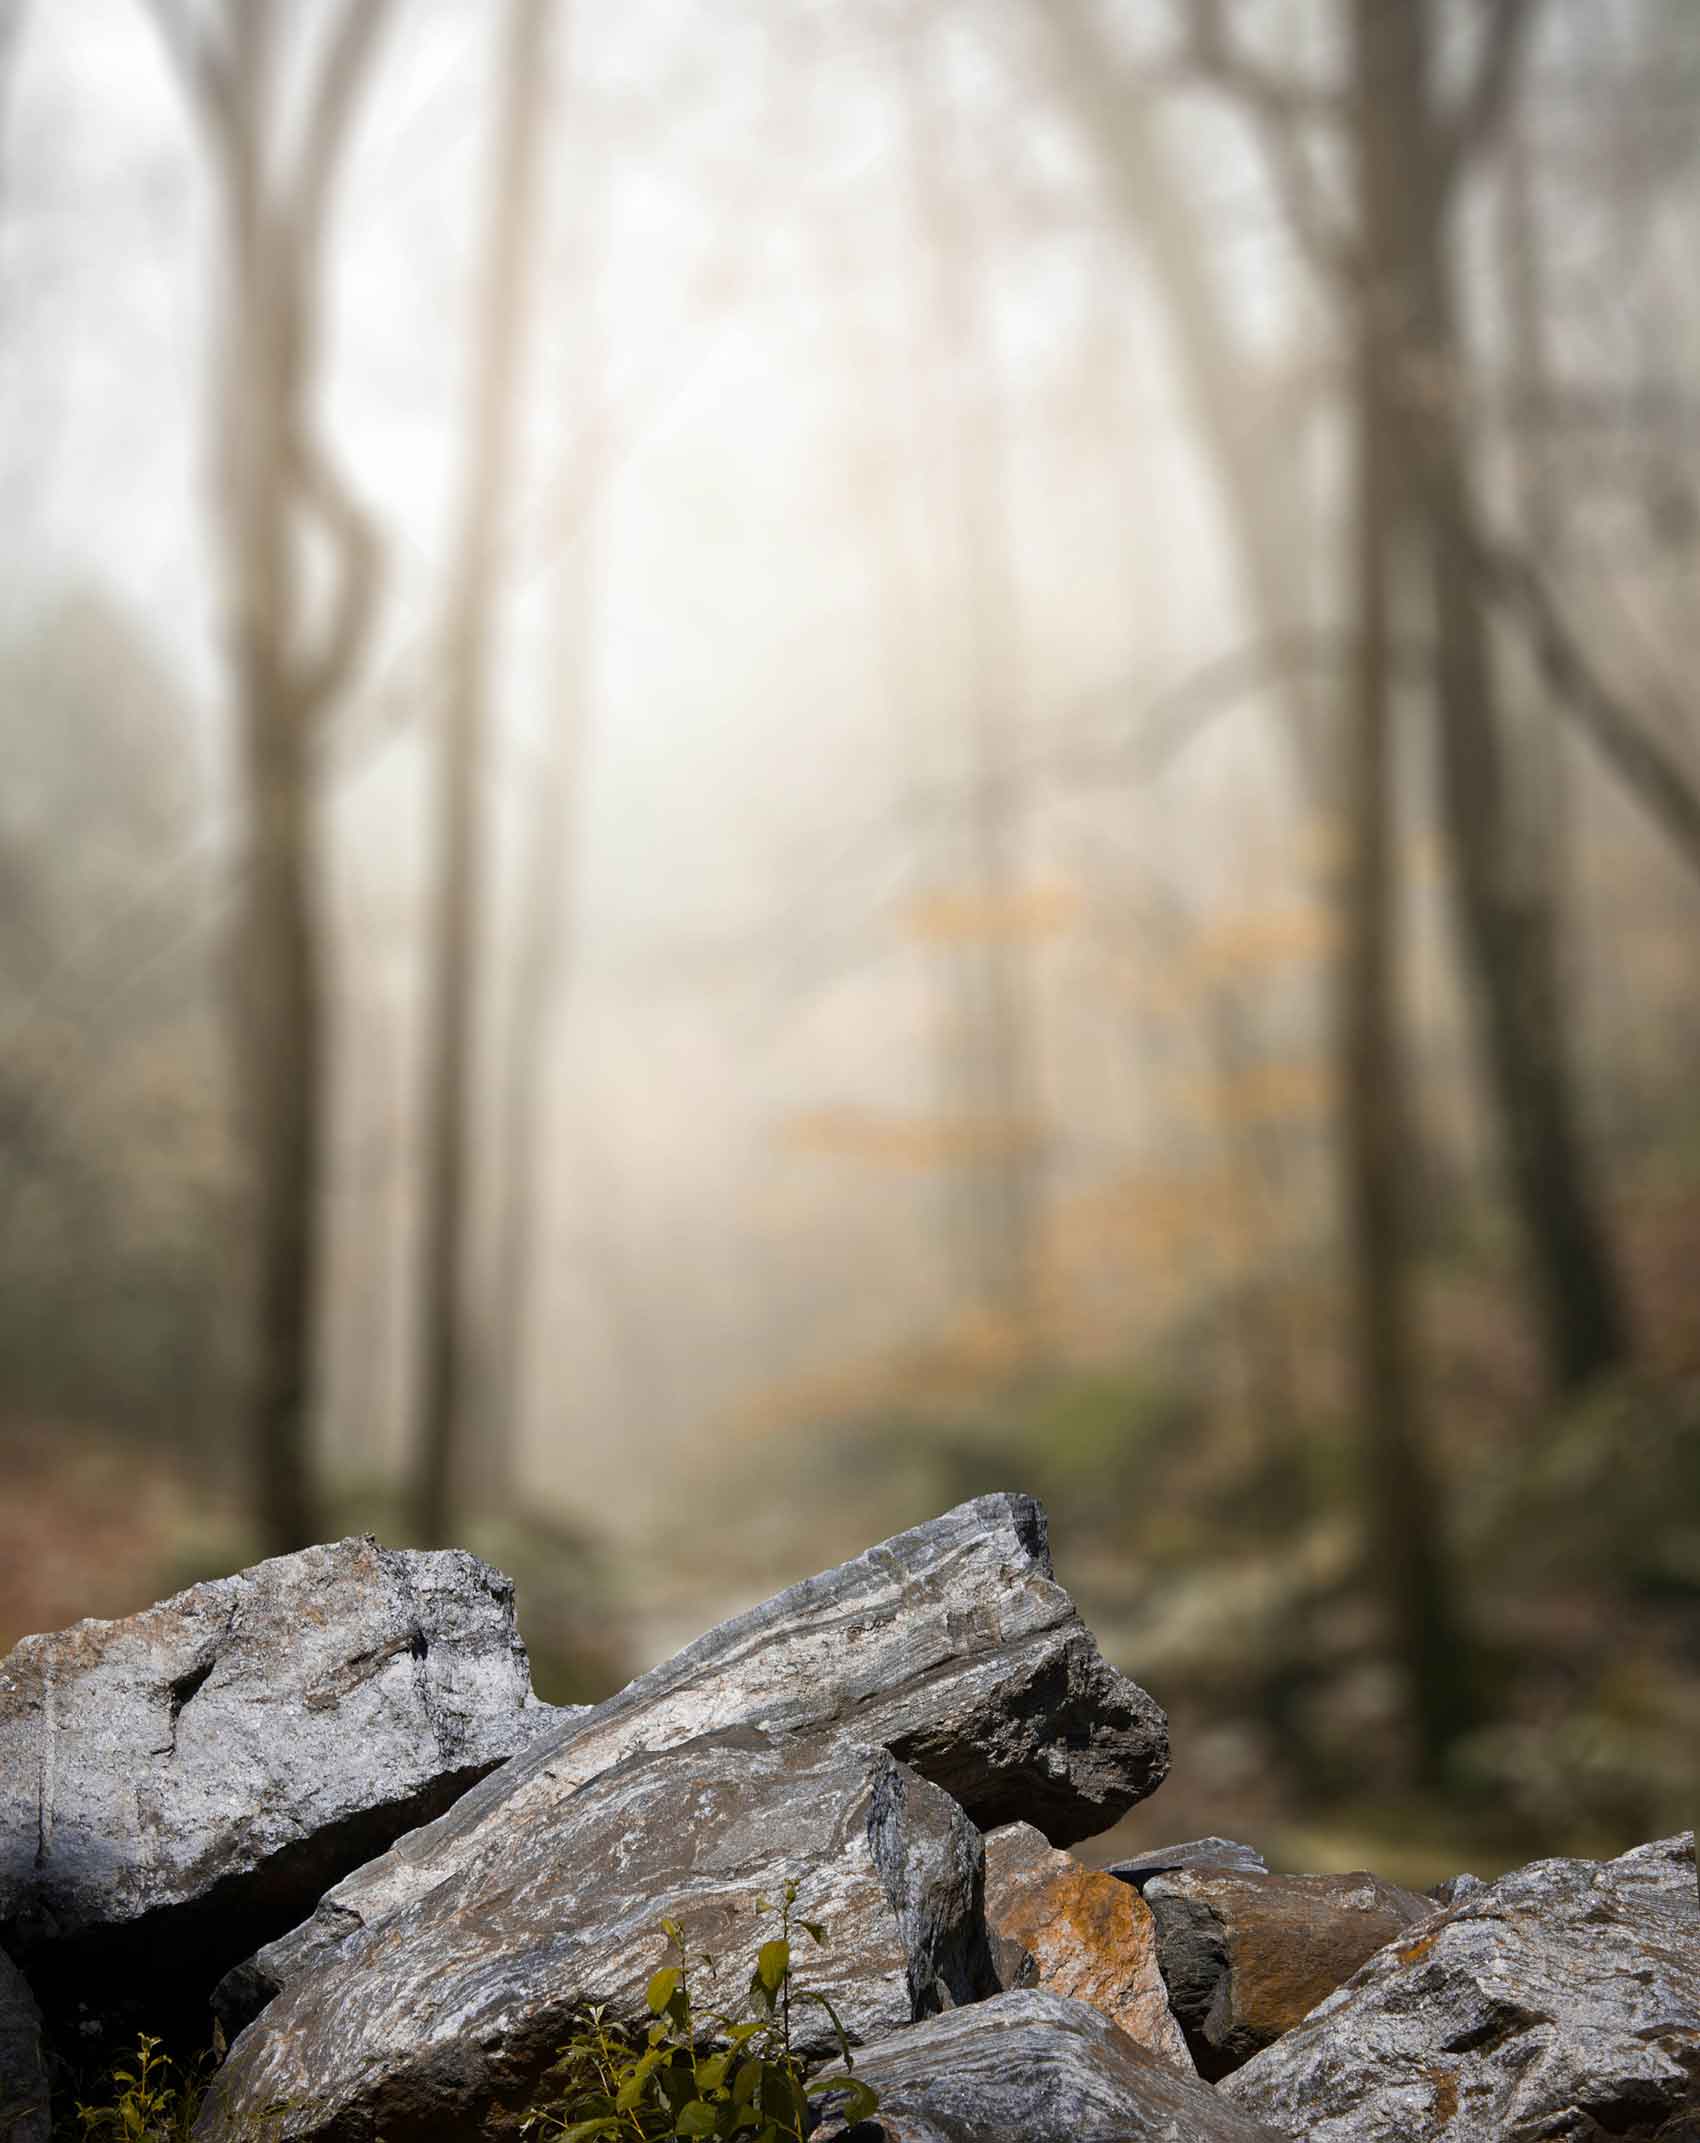 Stone Blur Background Free Stock Image [ Download ]